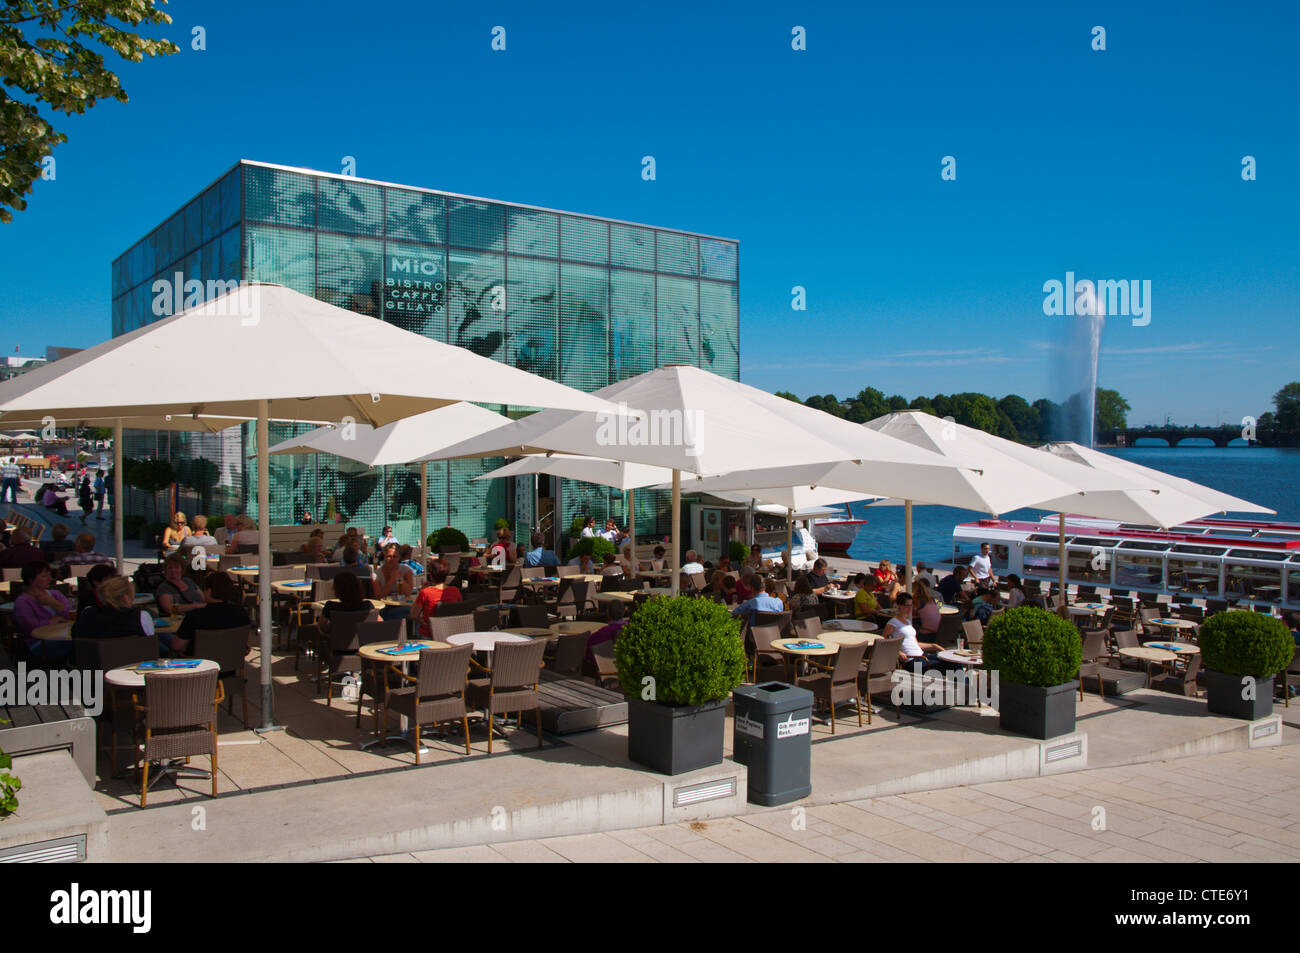 Restaurant cafe terrace outside Ice Cube building Binnenalster lakeside Mitte central Hamburg Germany Europe Stock Photo